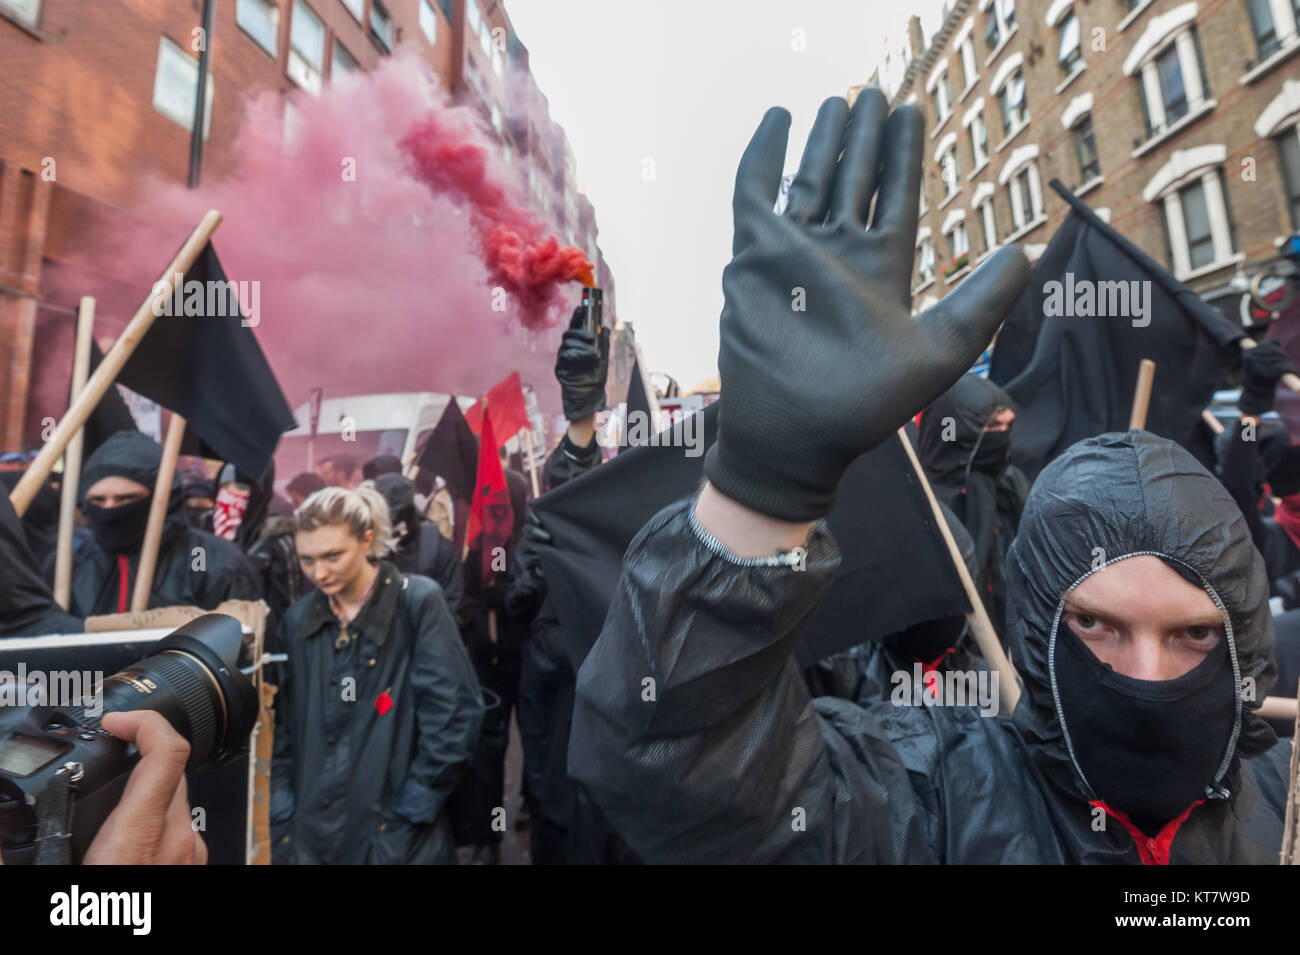 Black bloc students let of several smoke flares on the NCAFC Student march for free education - No Barriers, No Borders, No Business. Stock Photo